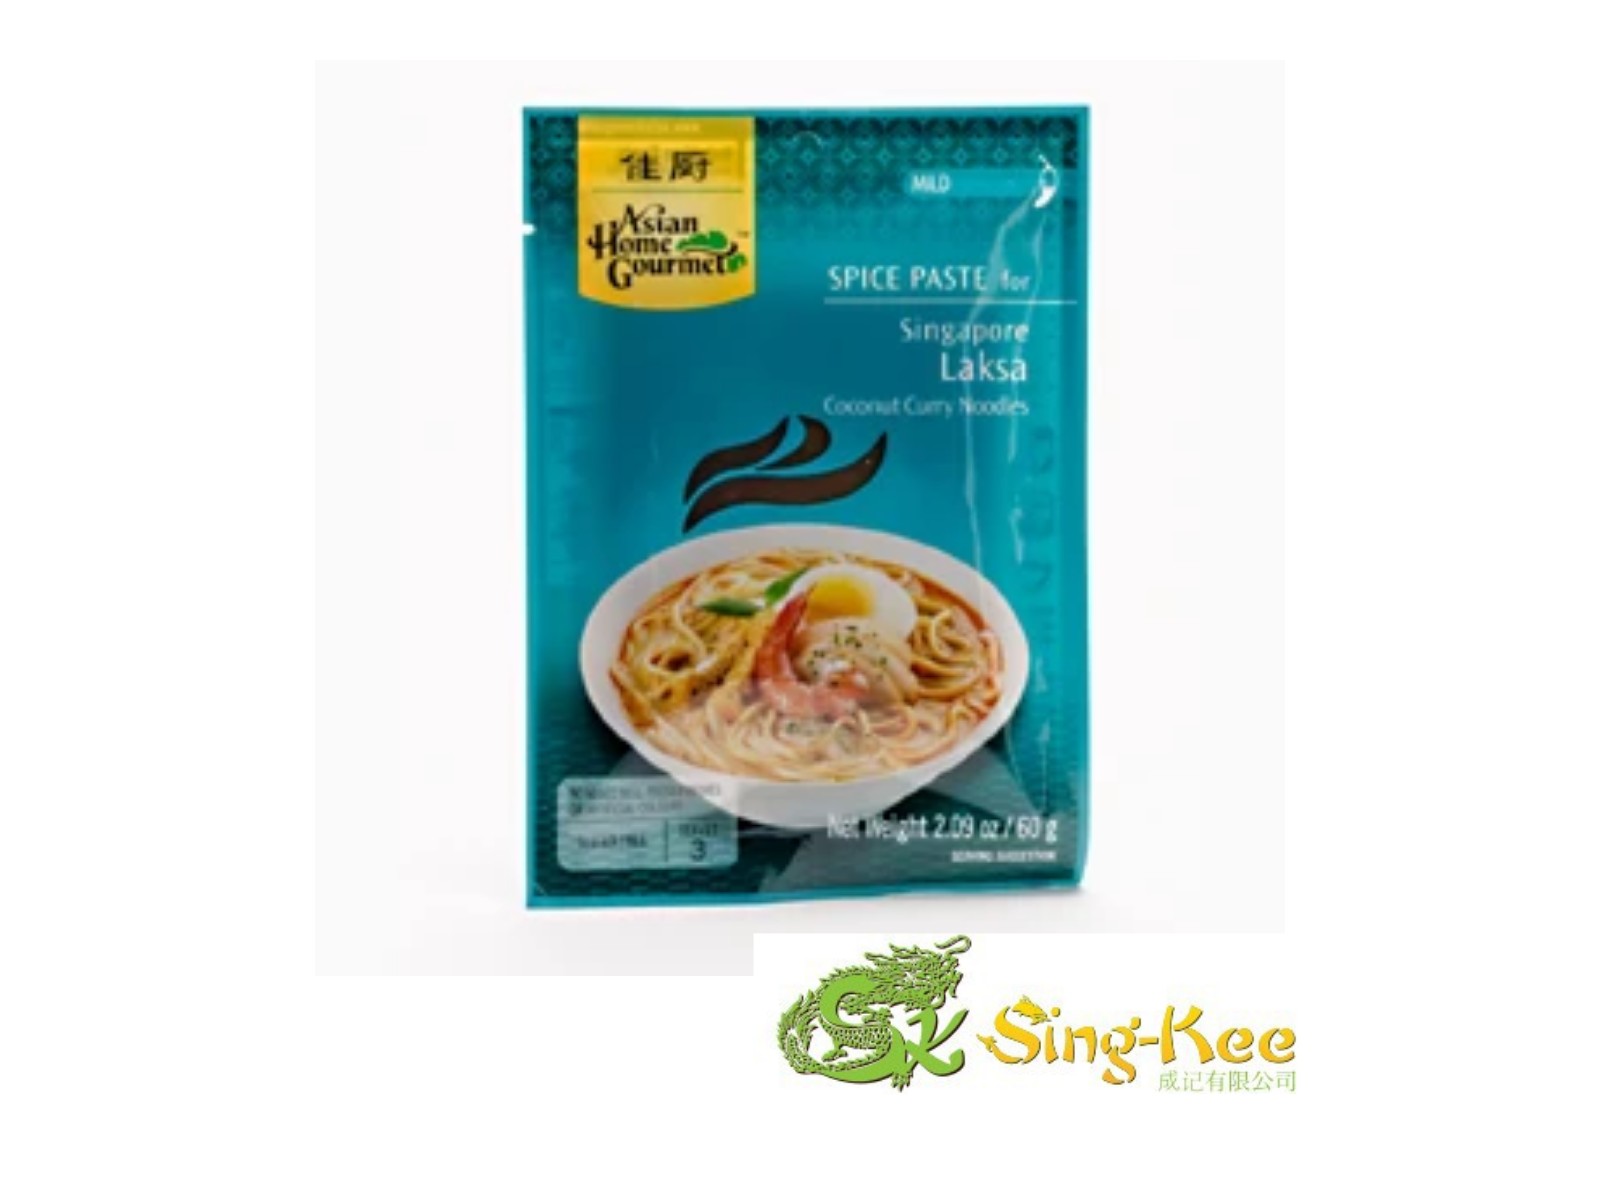 ASIAN HOME GOURMET SINGAPORE LAKSA PASTE 60G - Herbs, spices and ot...